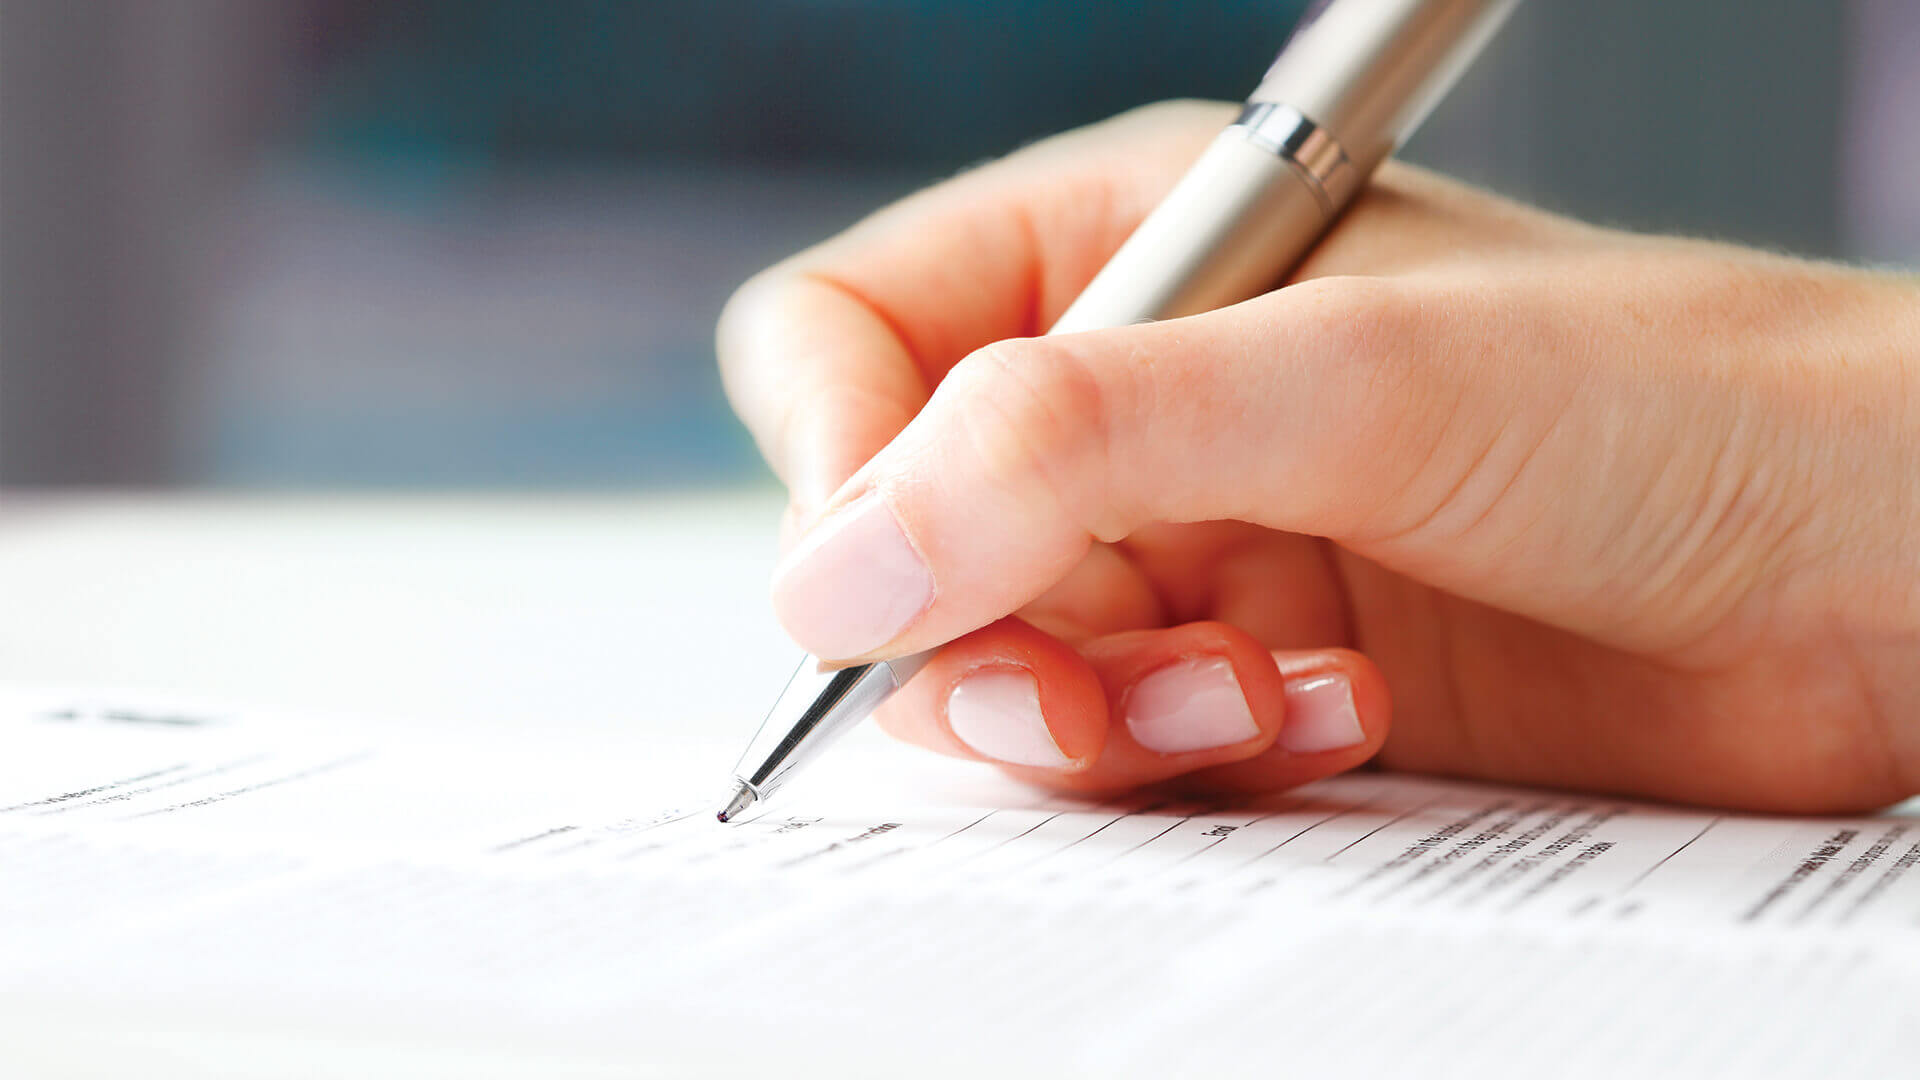 A close-up of a person's hand holding a pen and signing a document, emphasizing attention to detail.